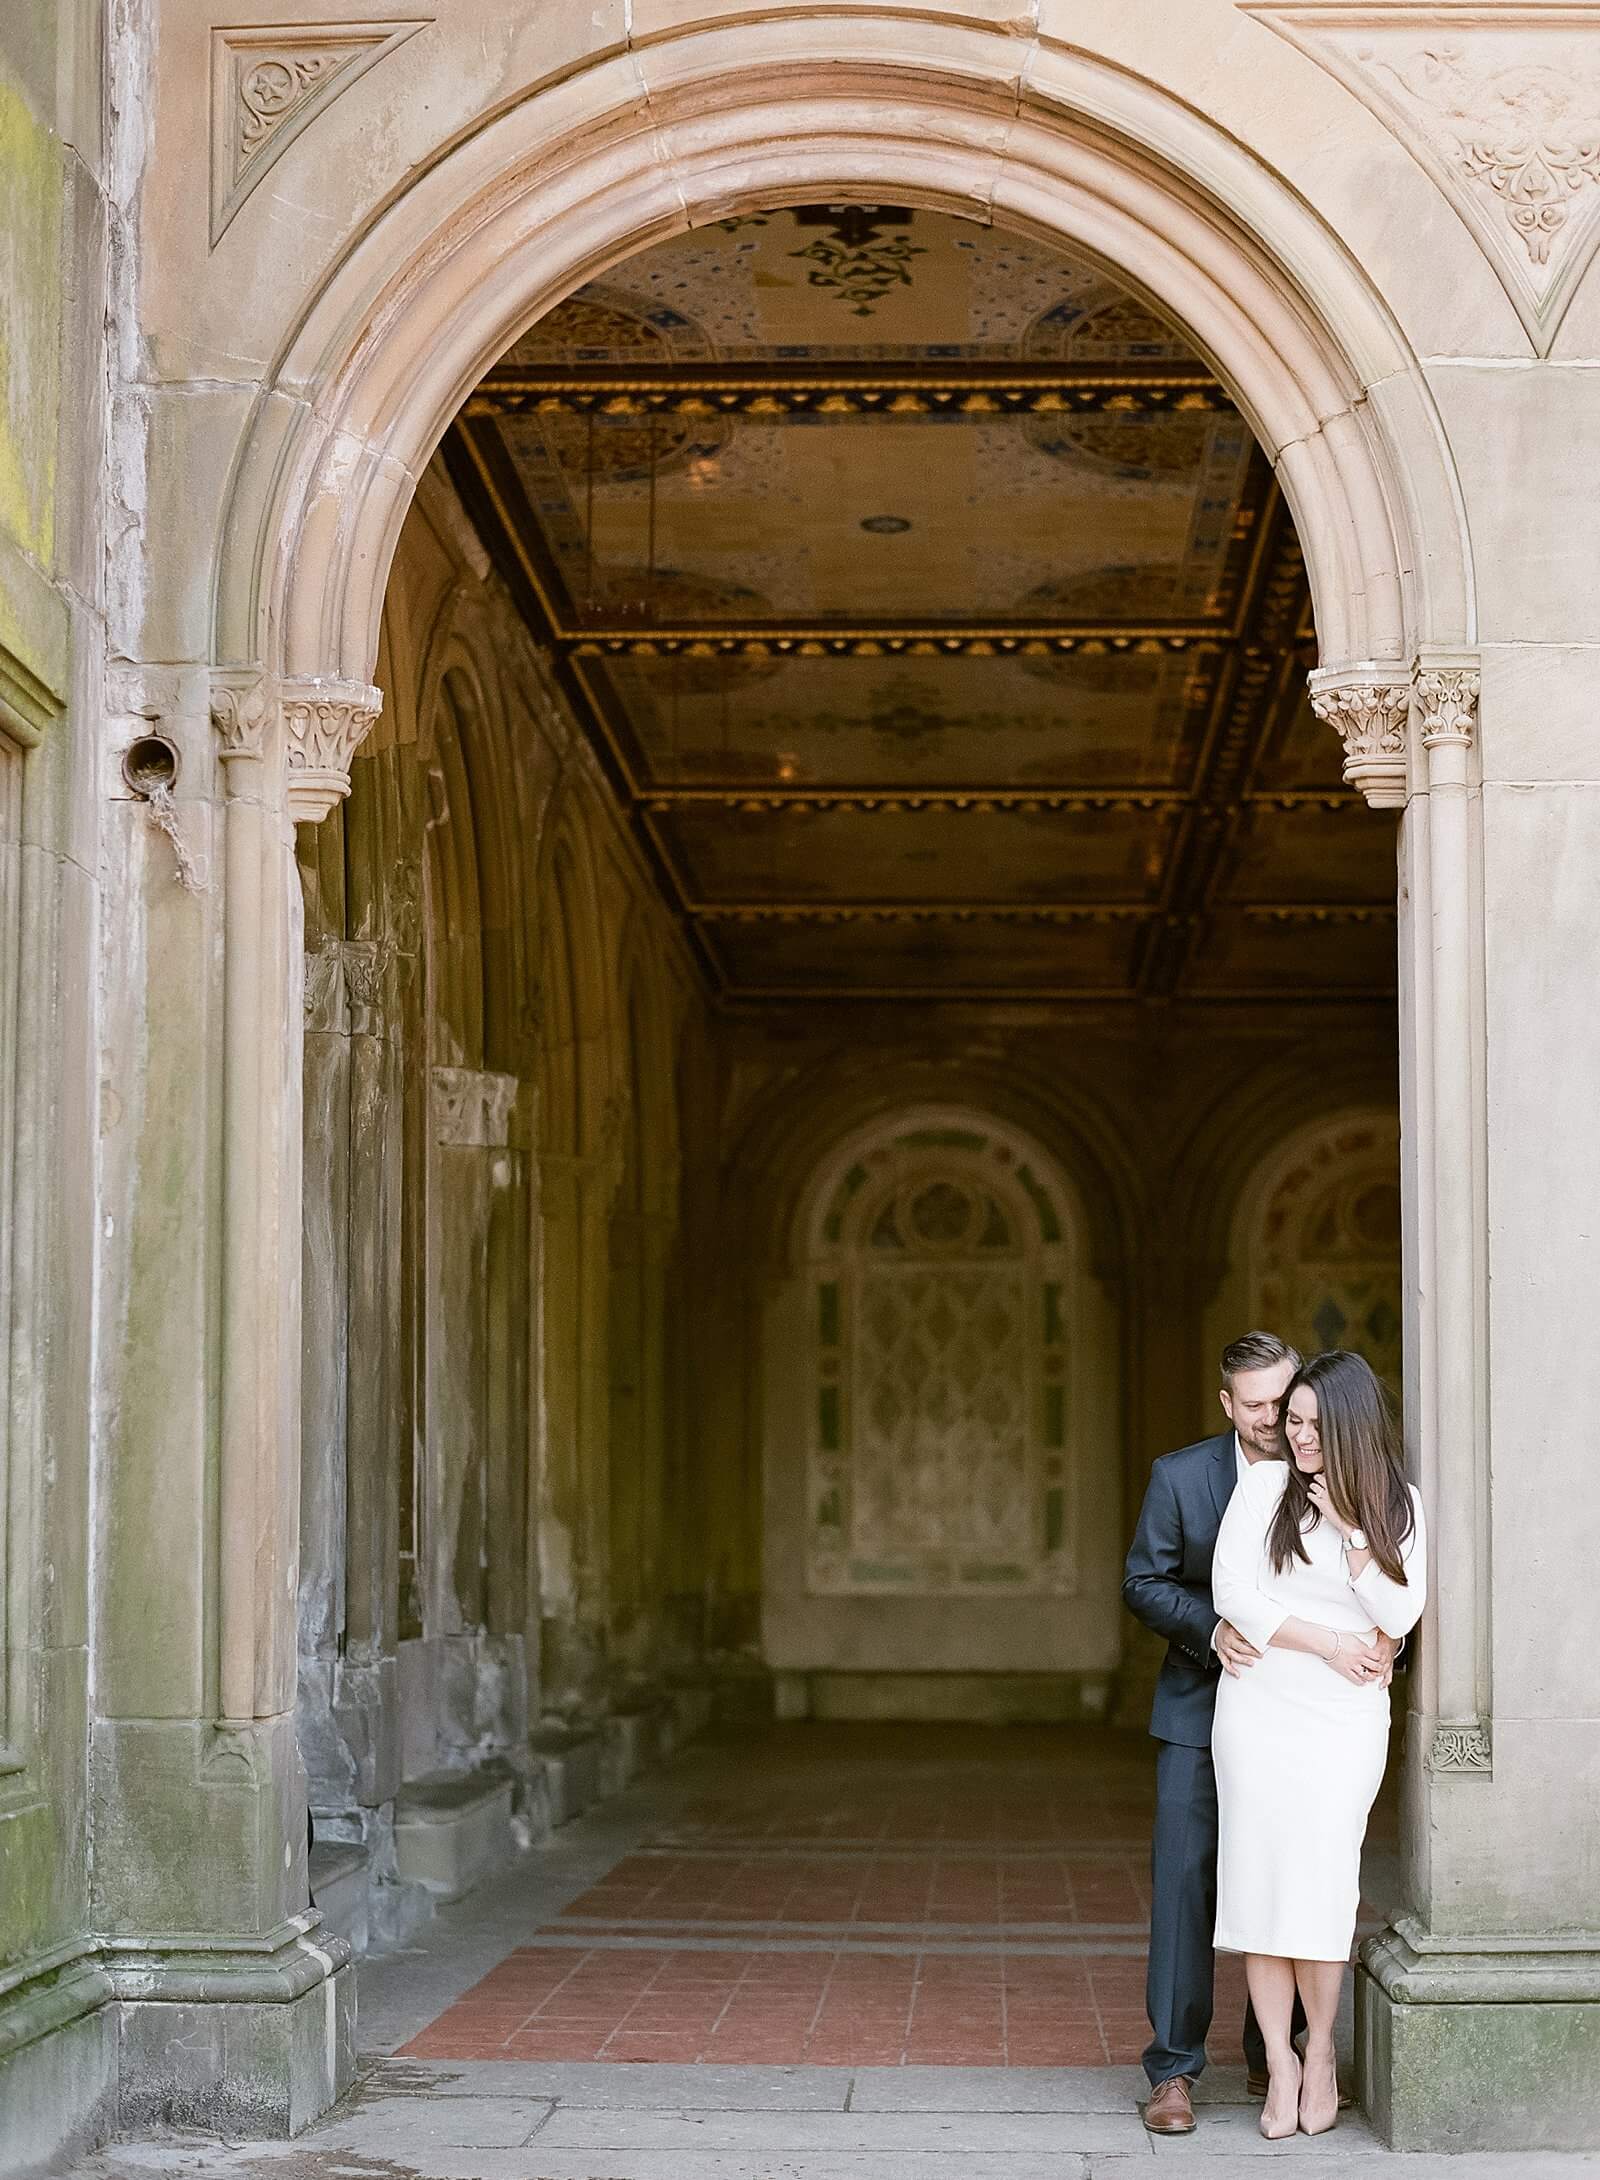 A couple during their engagement session at Bethesda Terrace in Central Park in Manhattan.